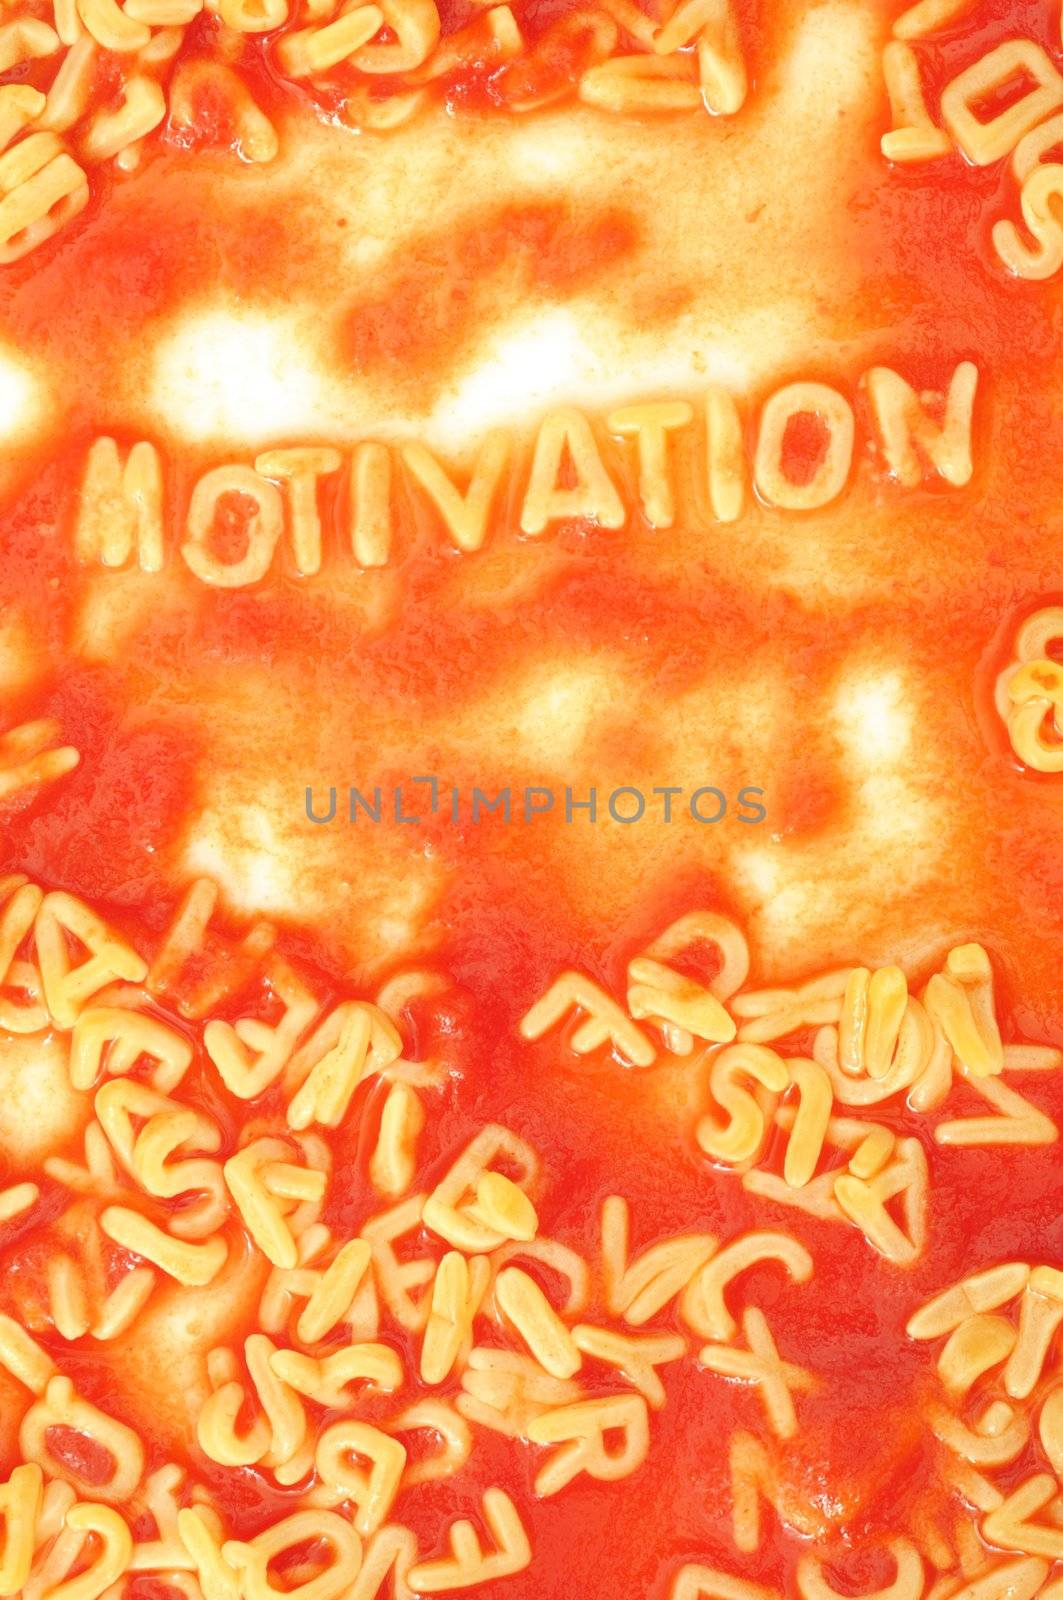 motivate or motivation business concept with red tomata pasta snack